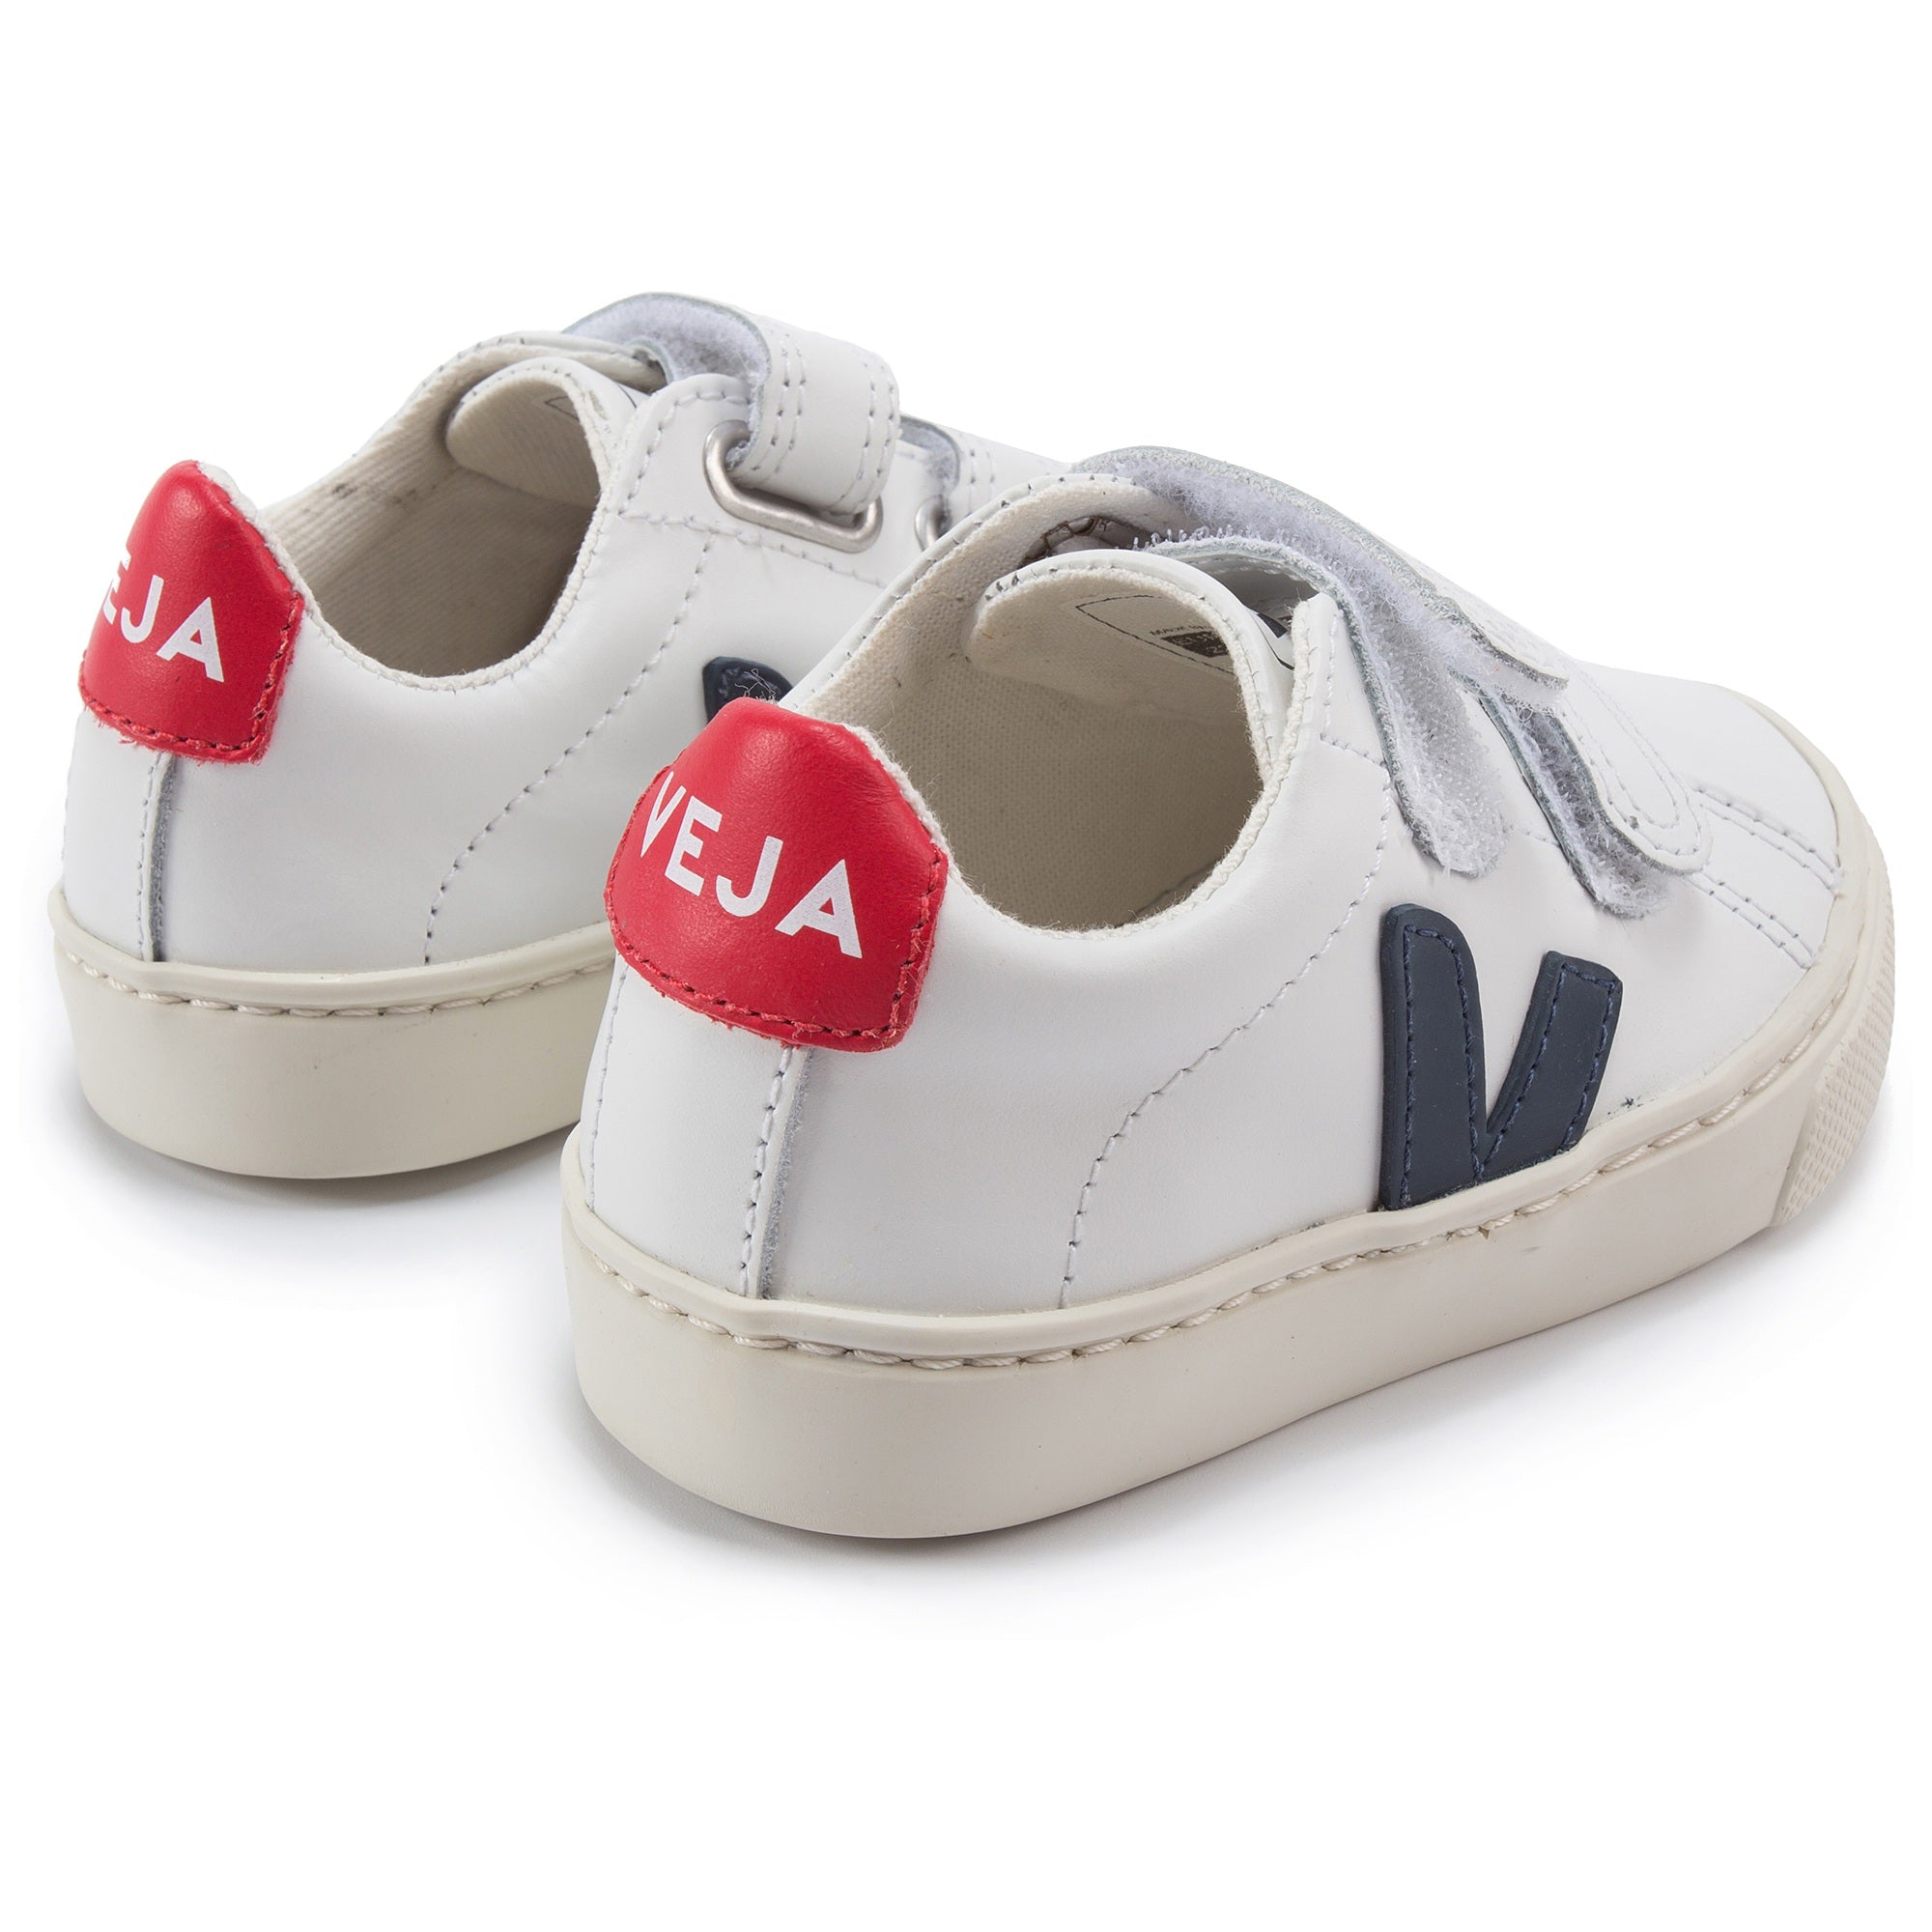 Girls & Boys White Leather Velcro With Blue "V" Shoes